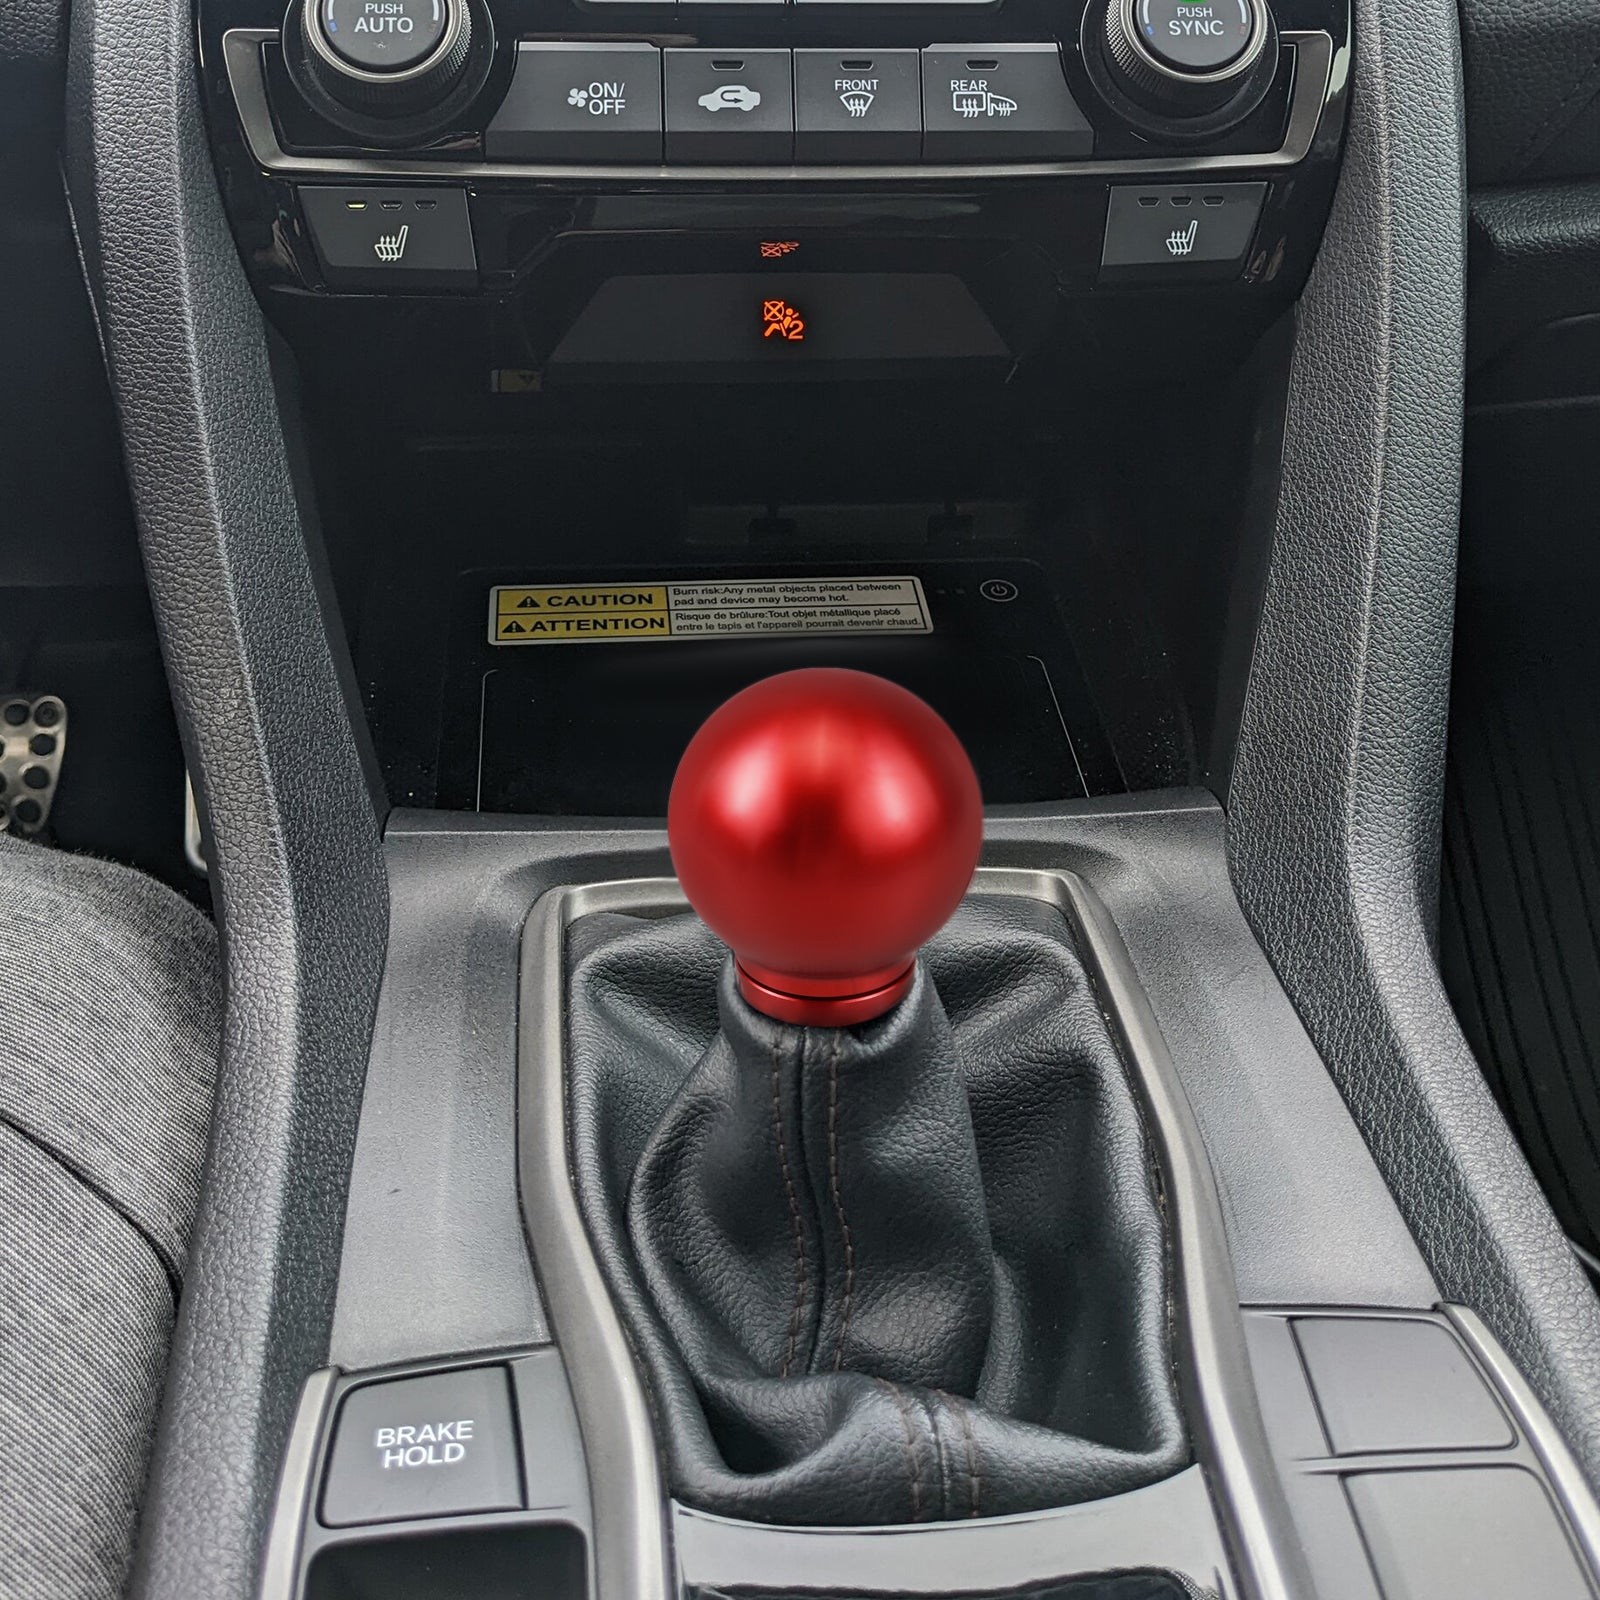 BEVINSEE Low-Profile Shift Knob Kit For Honda Civic Accord Acura RSX RSX-S TSX